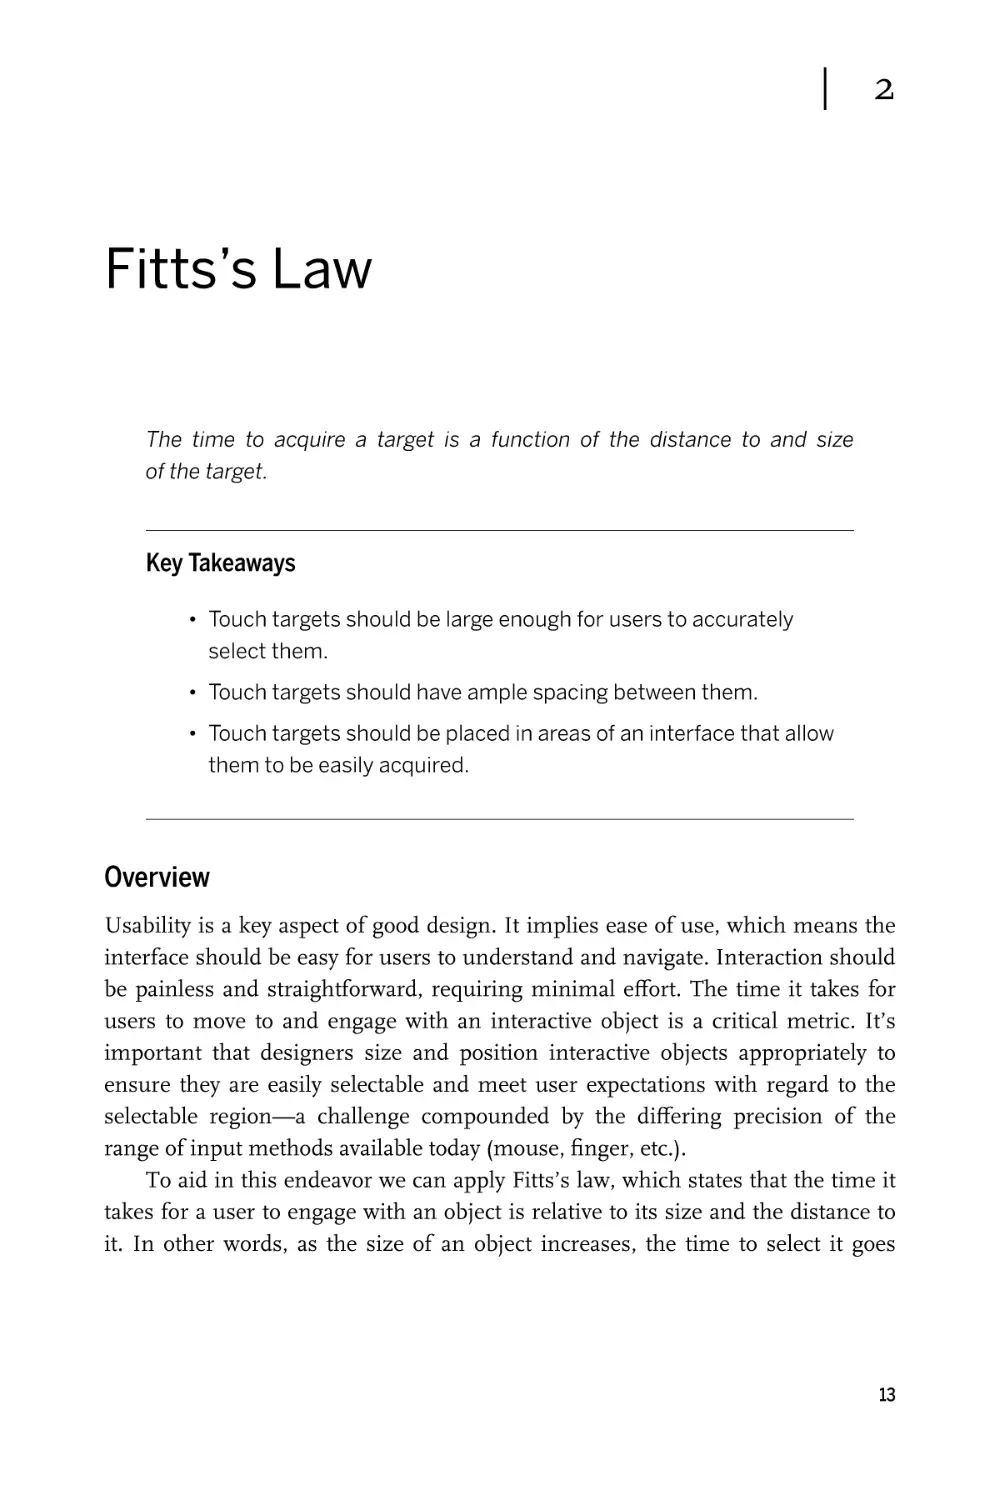 Chapter 2. Fitts’s Law
Overview